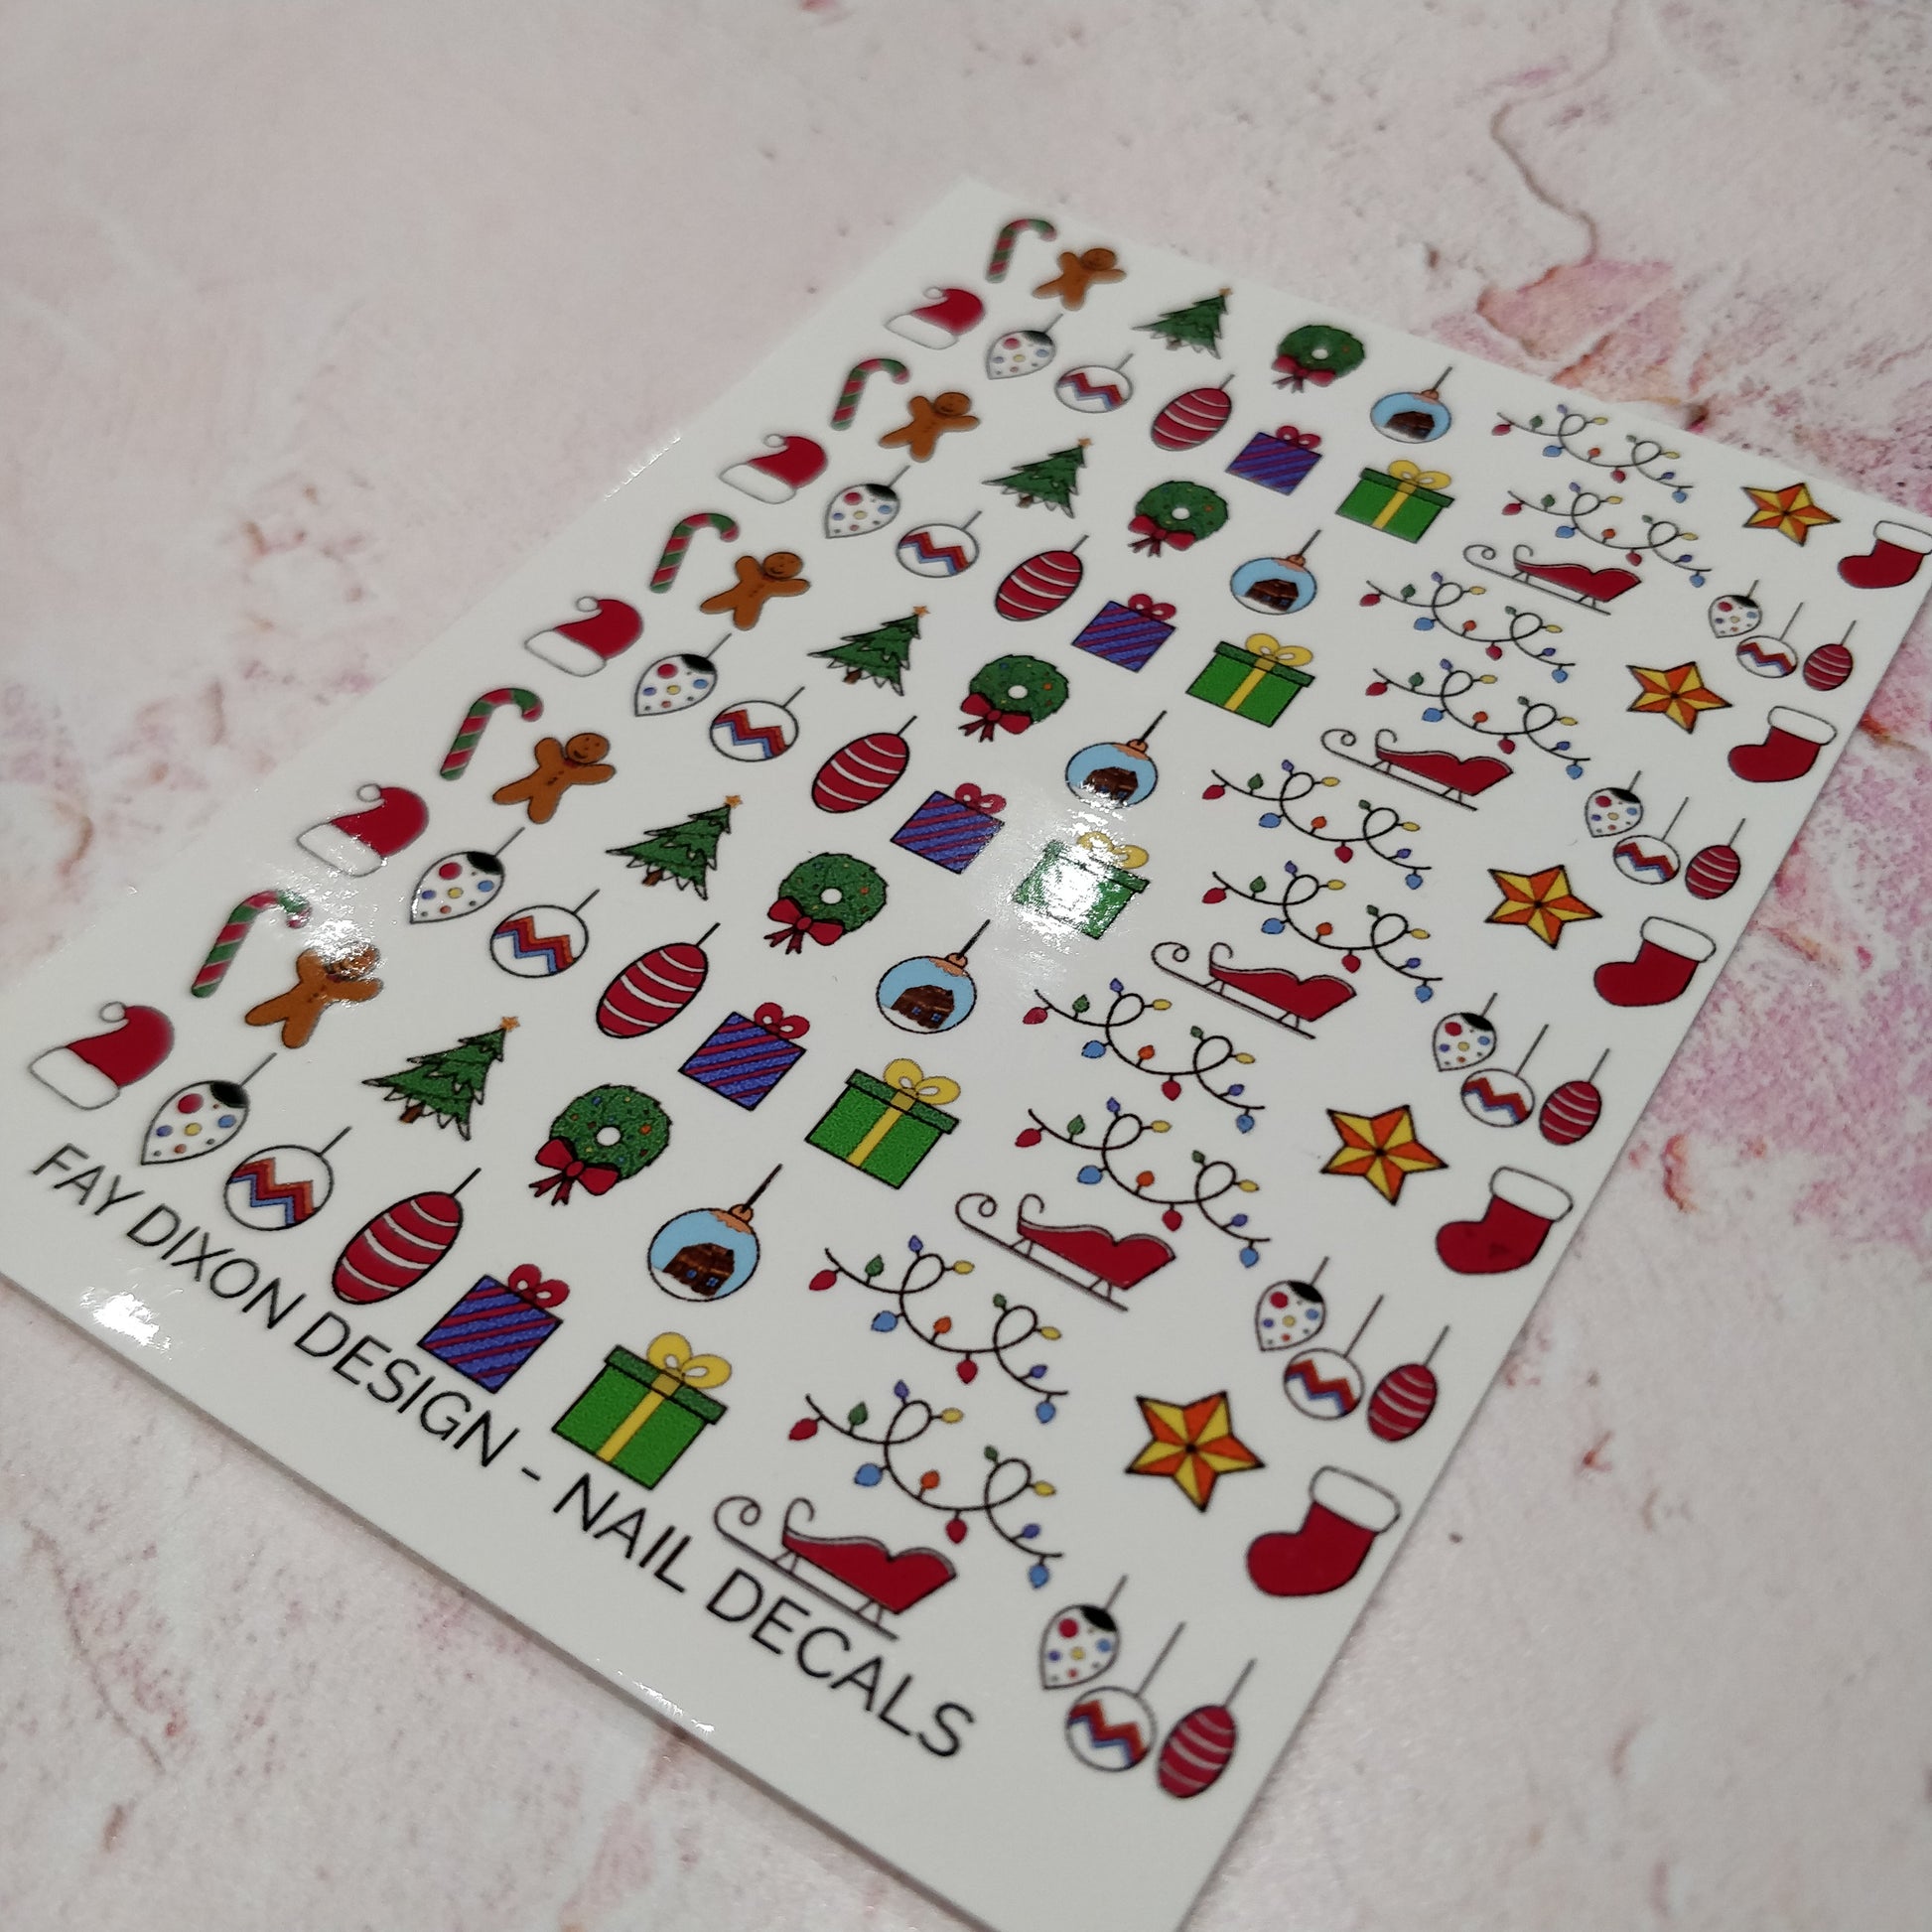 Christmas Waterslide Nail Decals - Fay Dixon Design